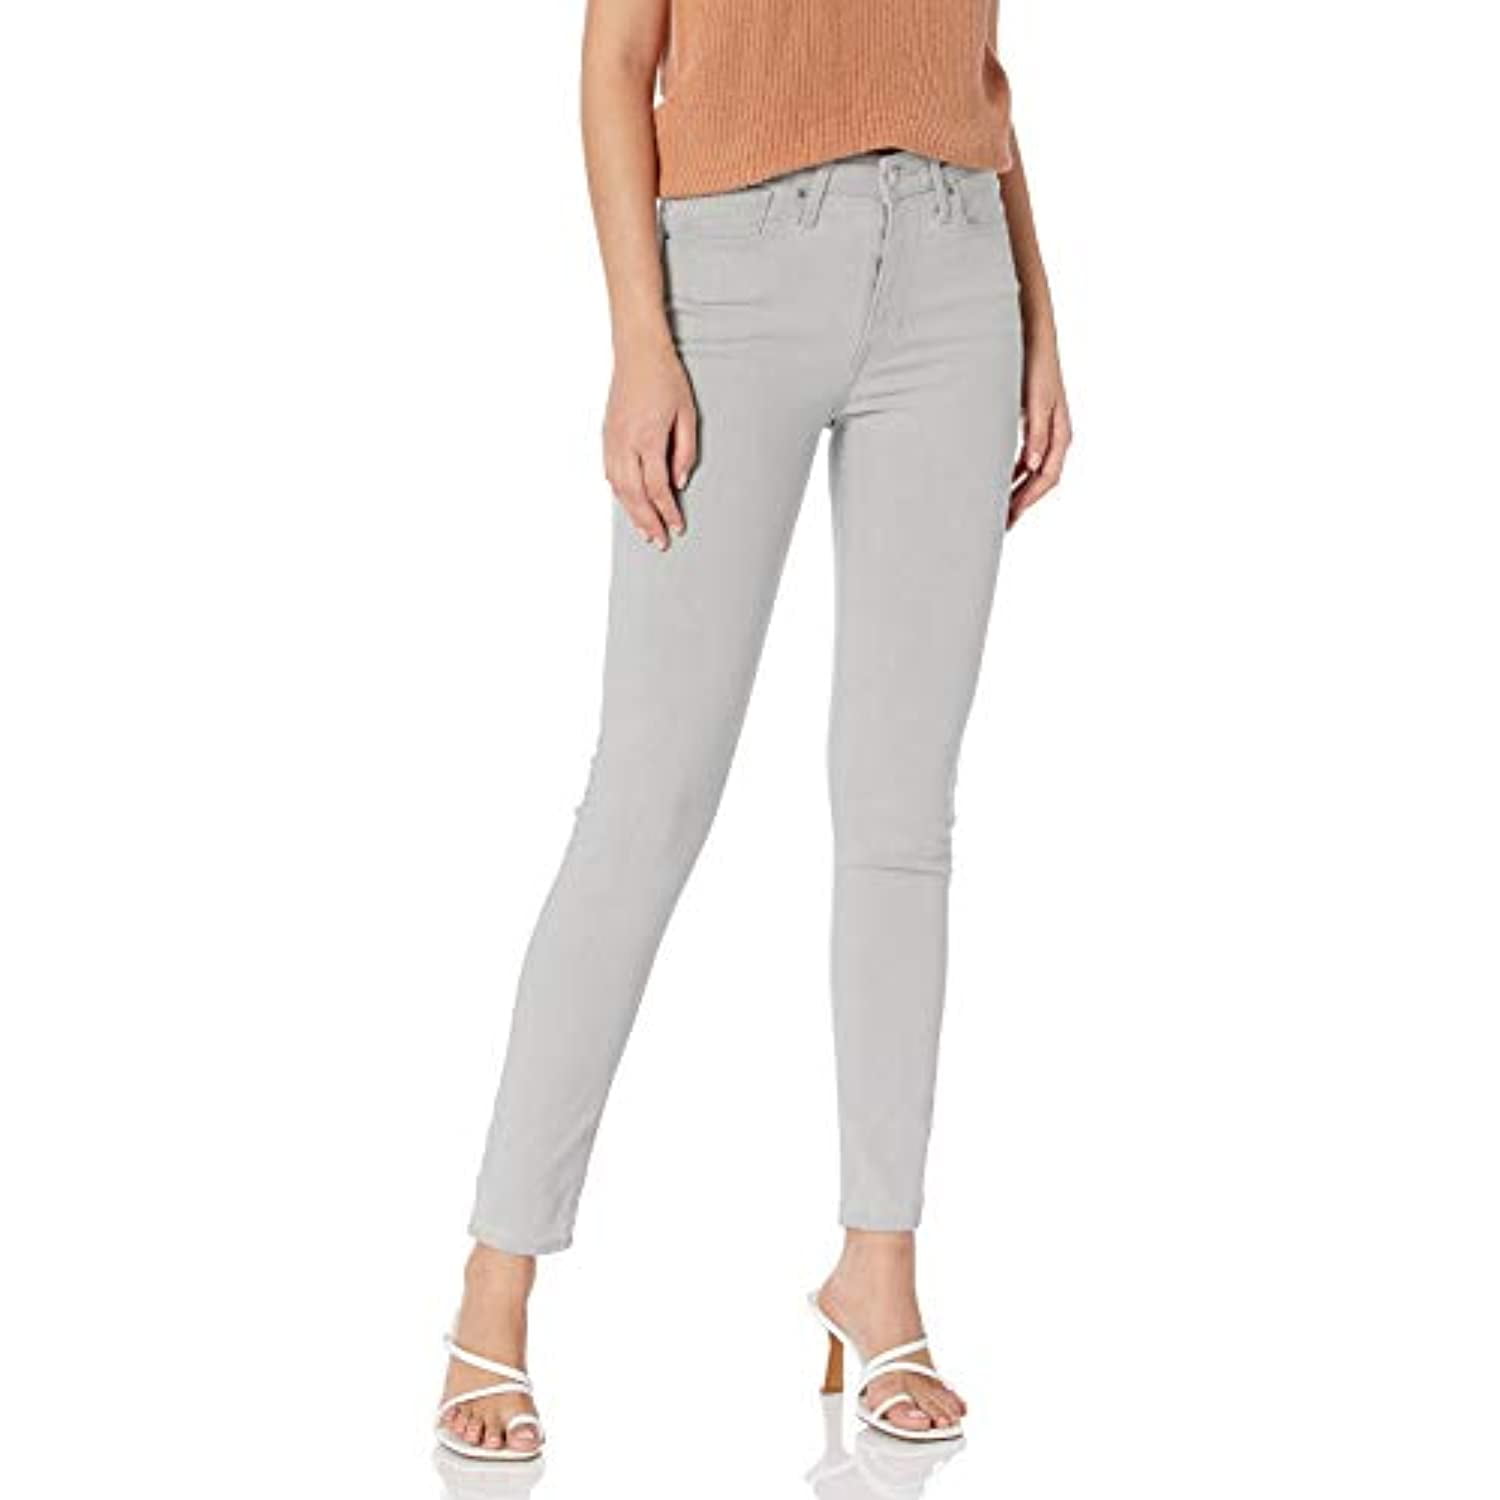 Levi's Women's 721 High Rise Skinny Jeans, Grey Or Gray, 24 (US 00) M -  